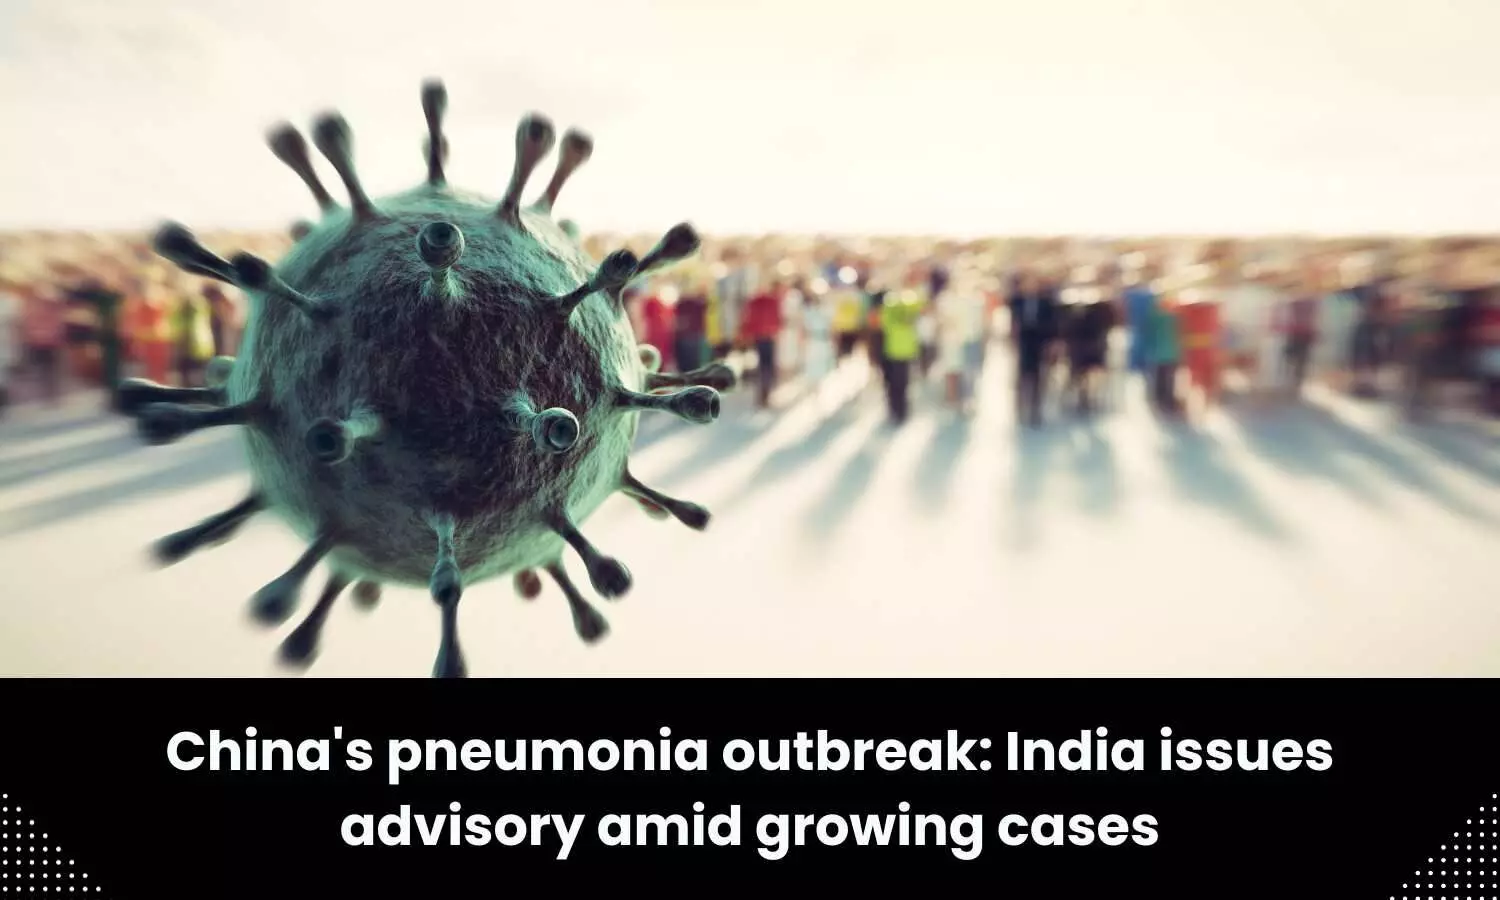 Chinas pneumonia outbreak: India issues advisory amid growing cases